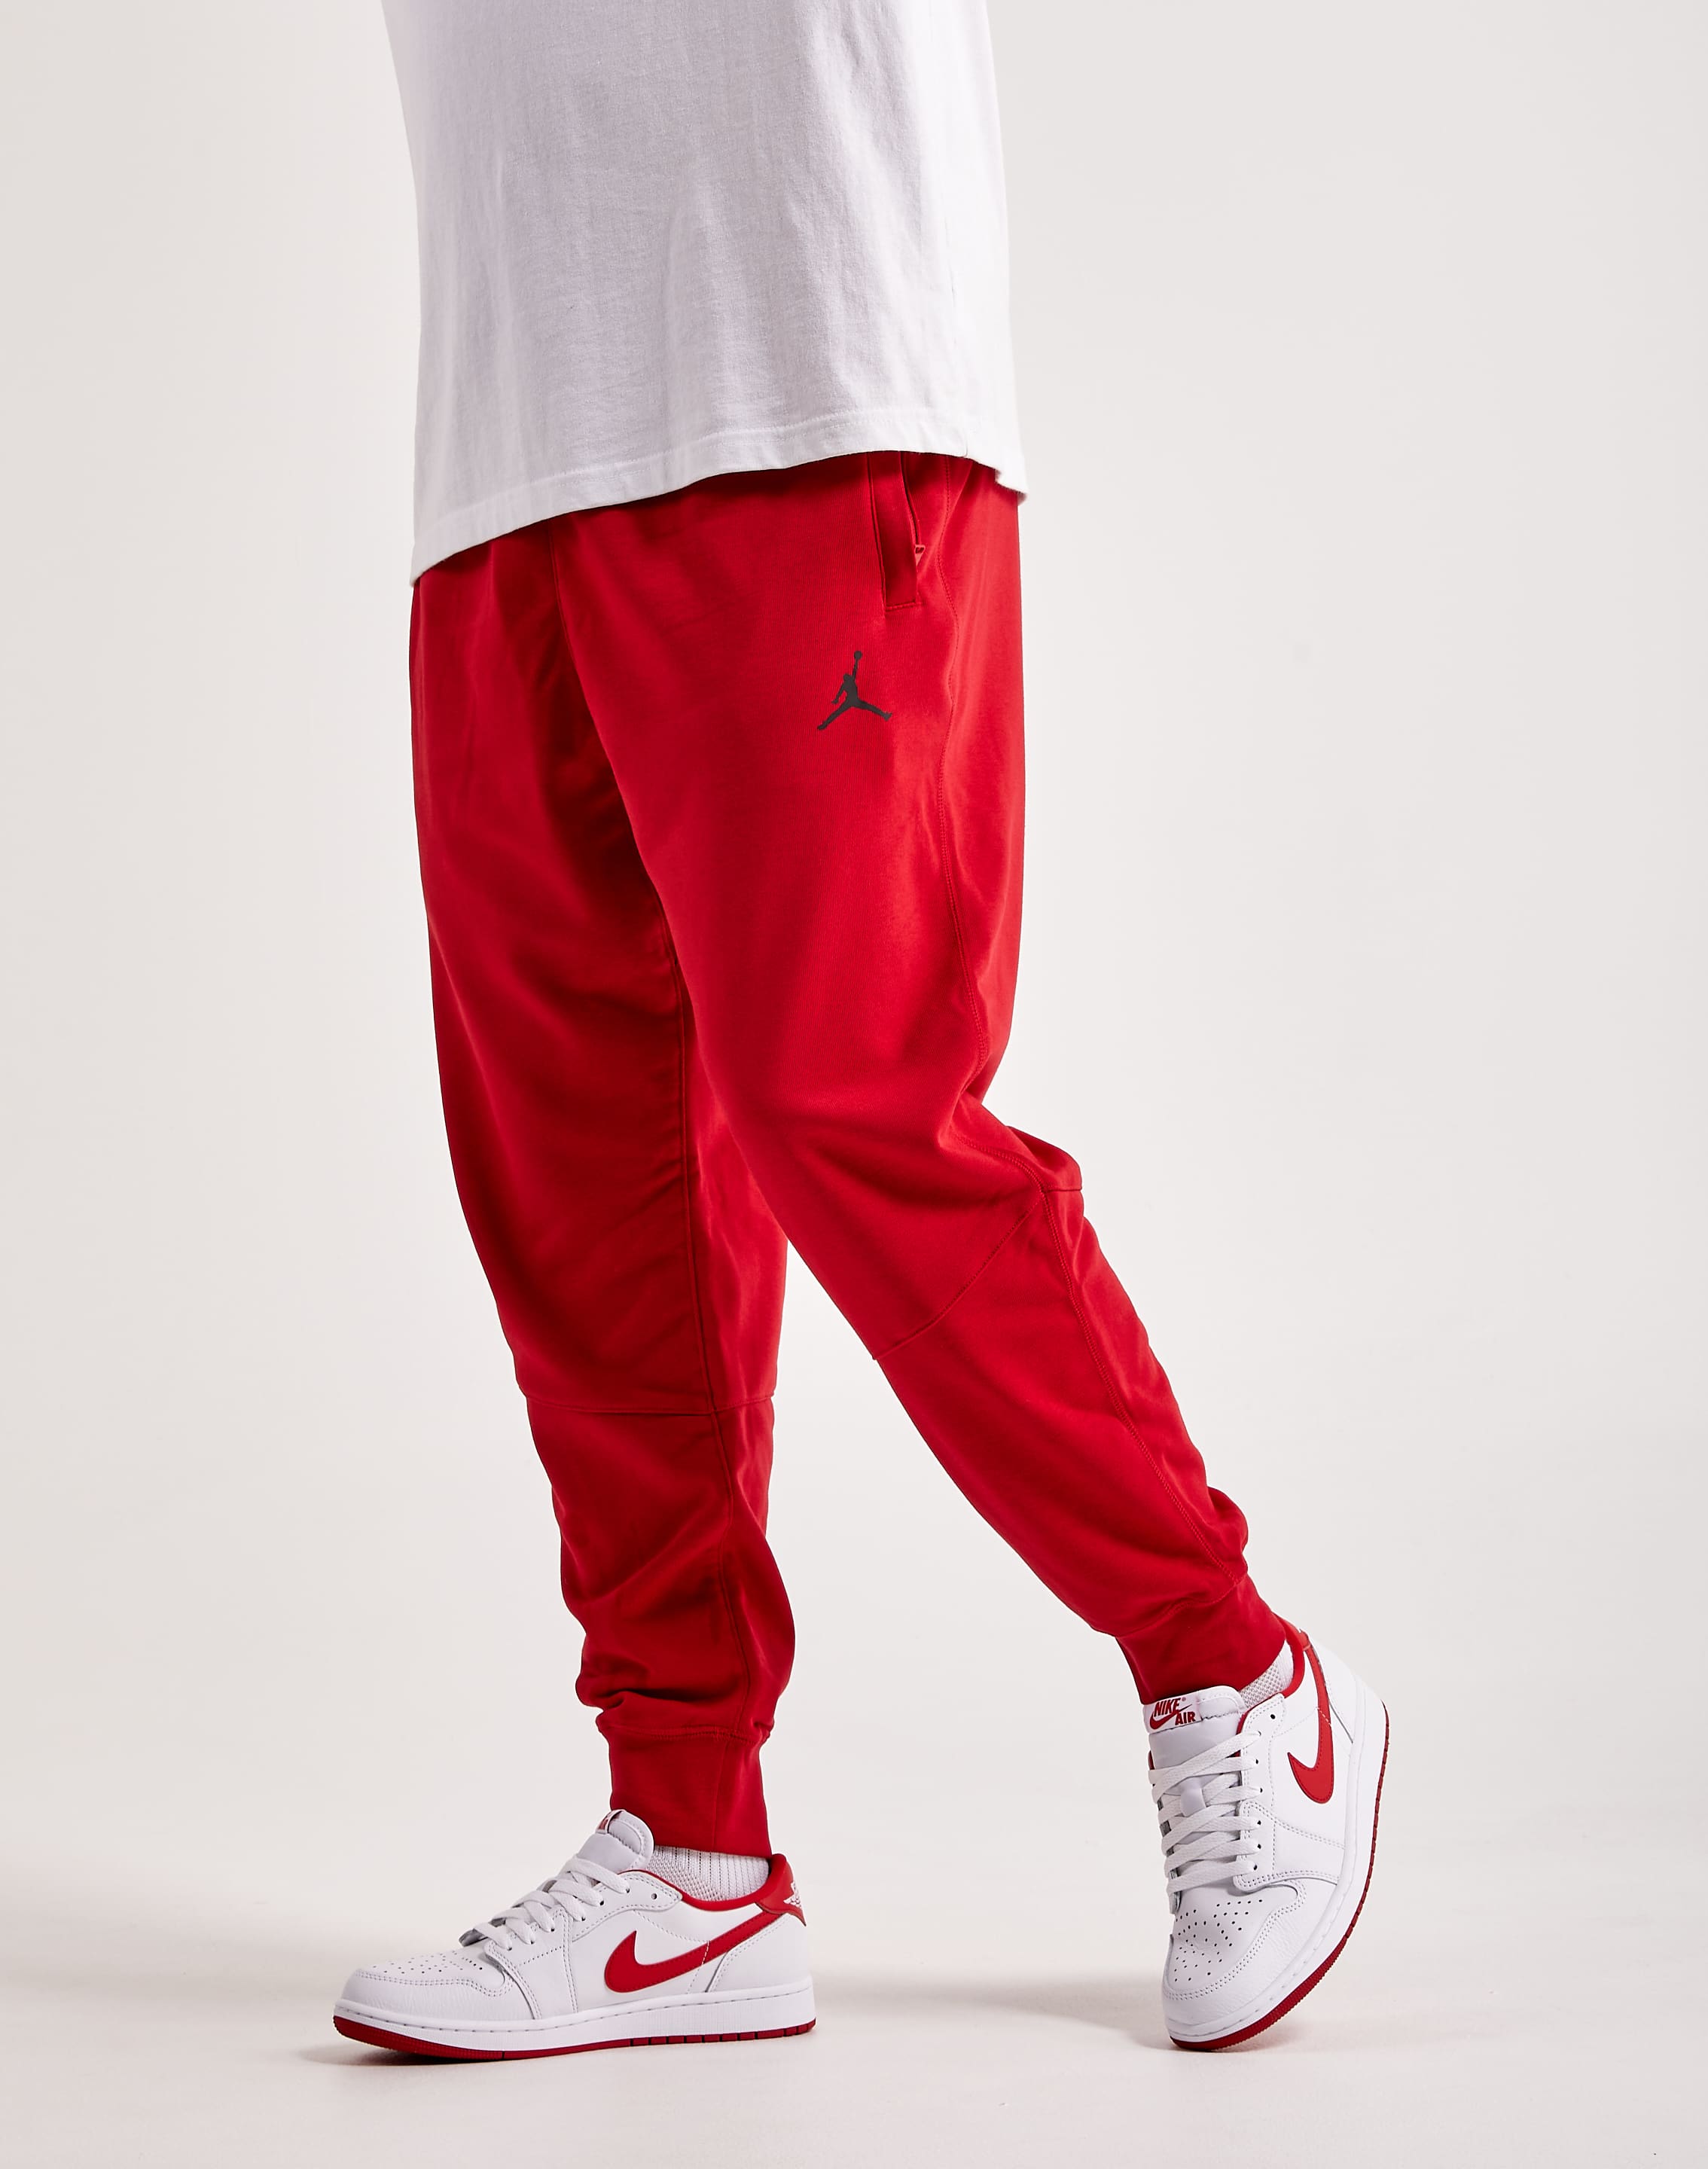 Armani Exchange French Terry Sweatpants – DTLR